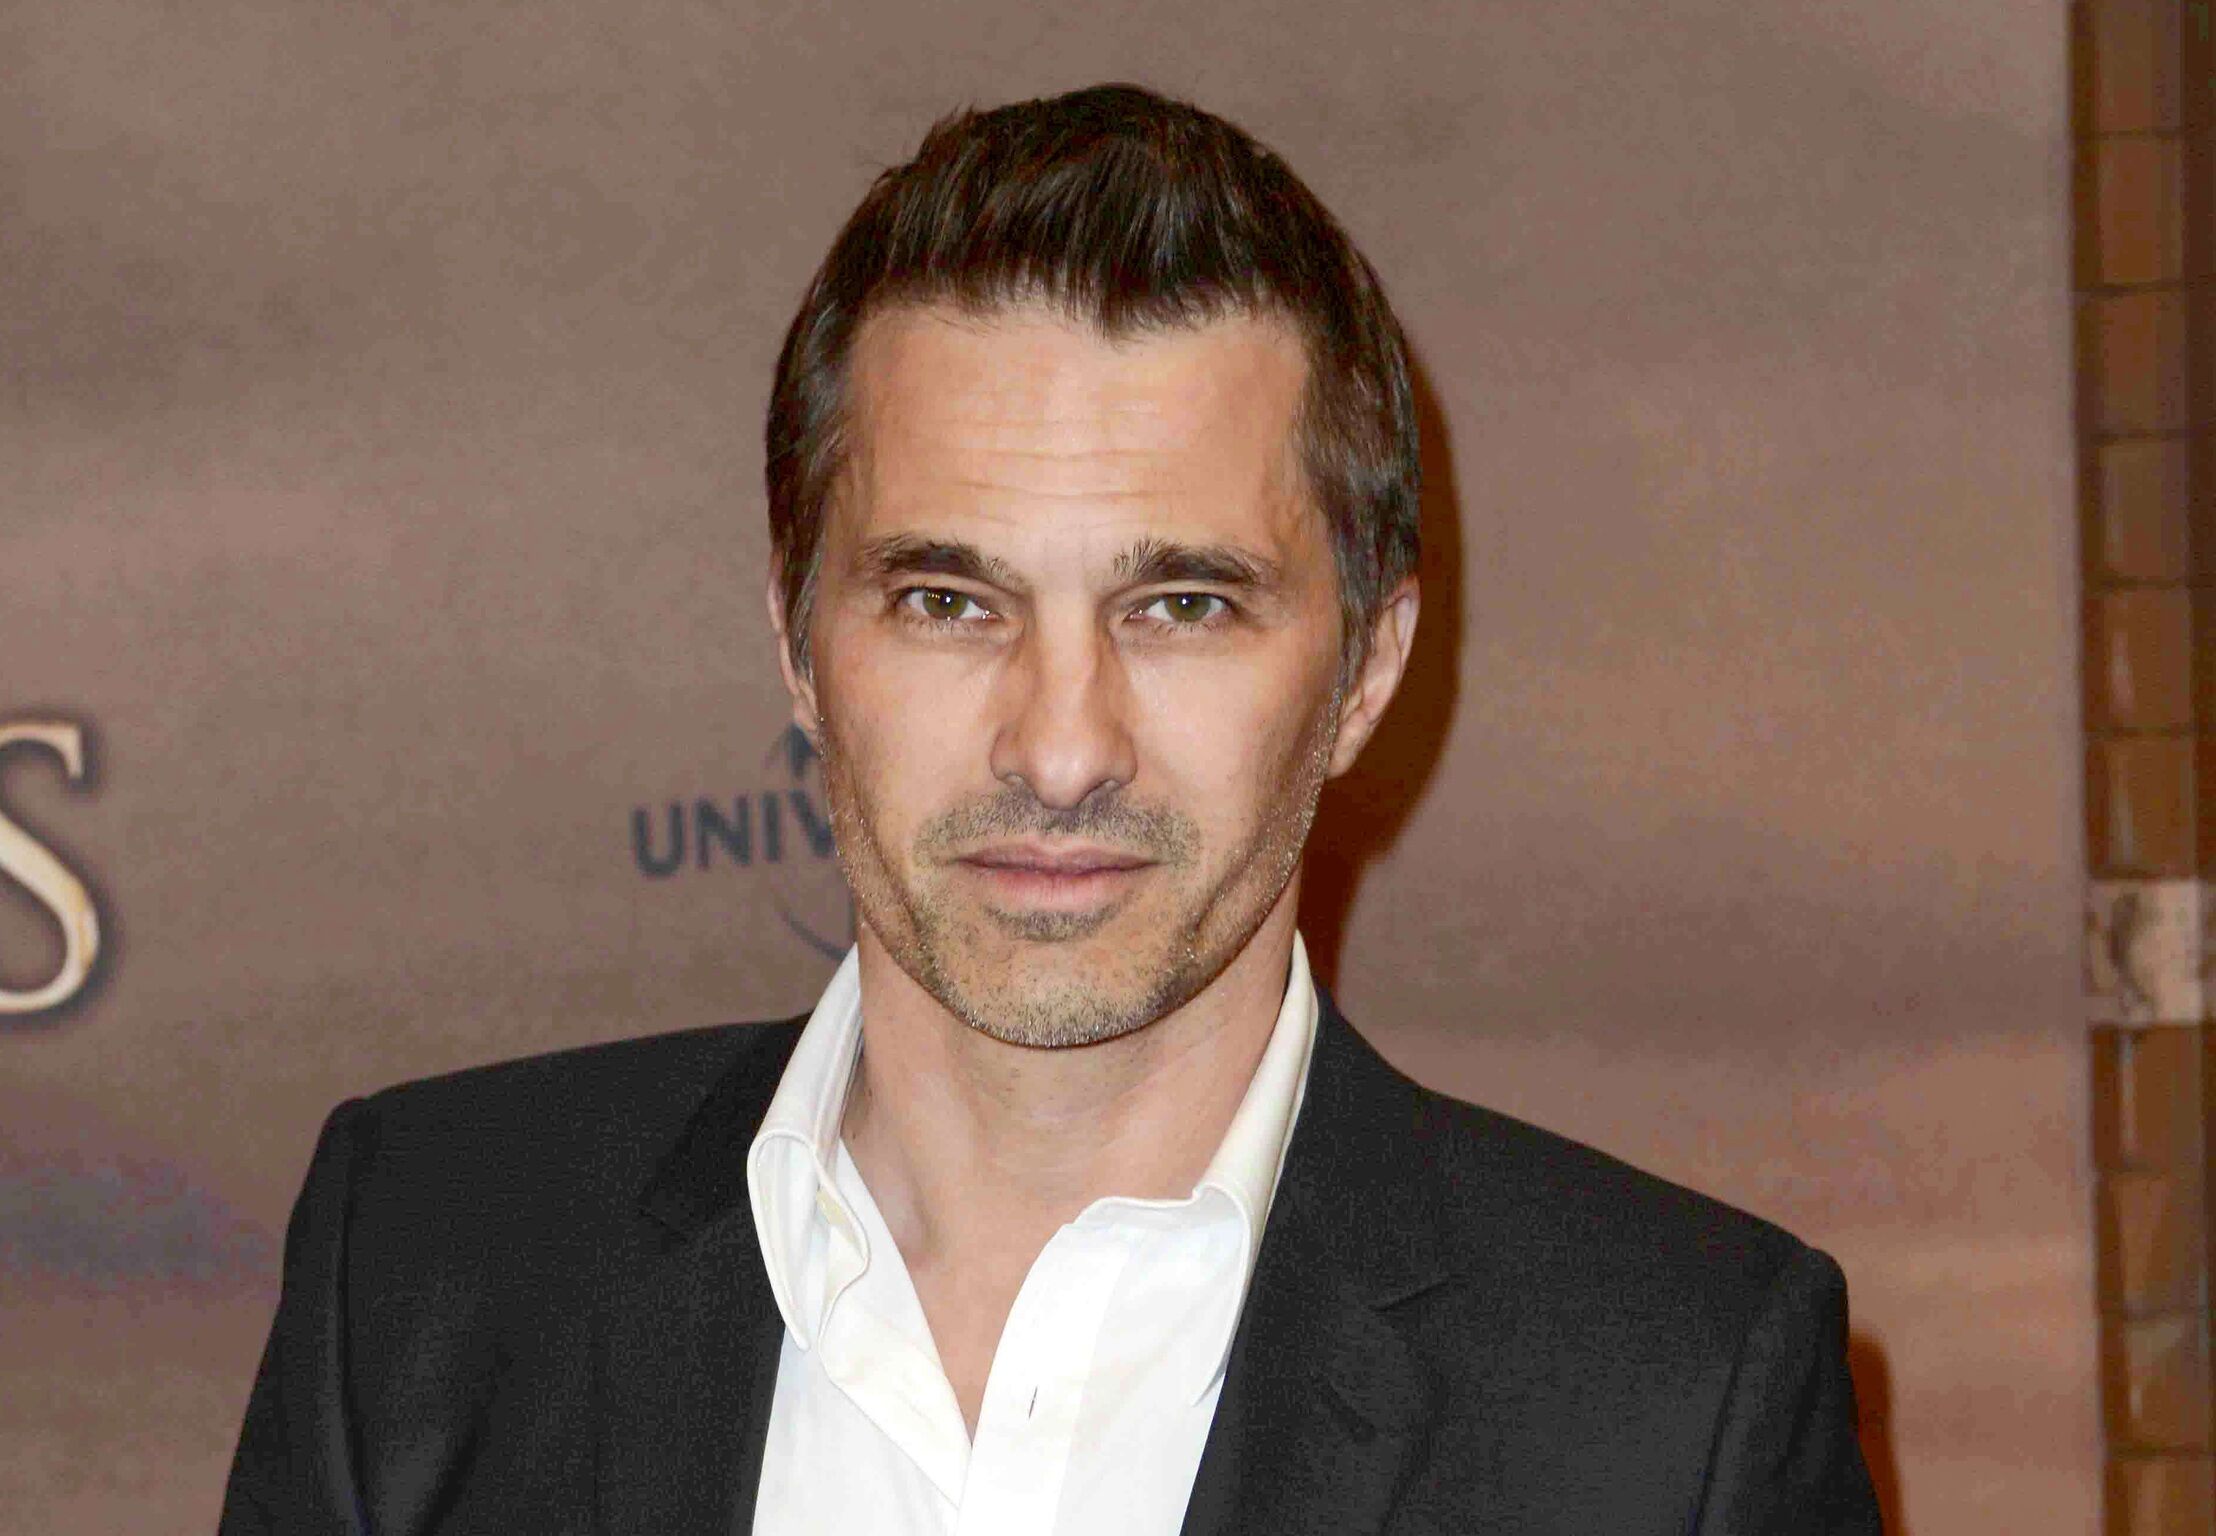 Olivier Martinez Biography Net Worth,Early Life, Relationships, Divorced